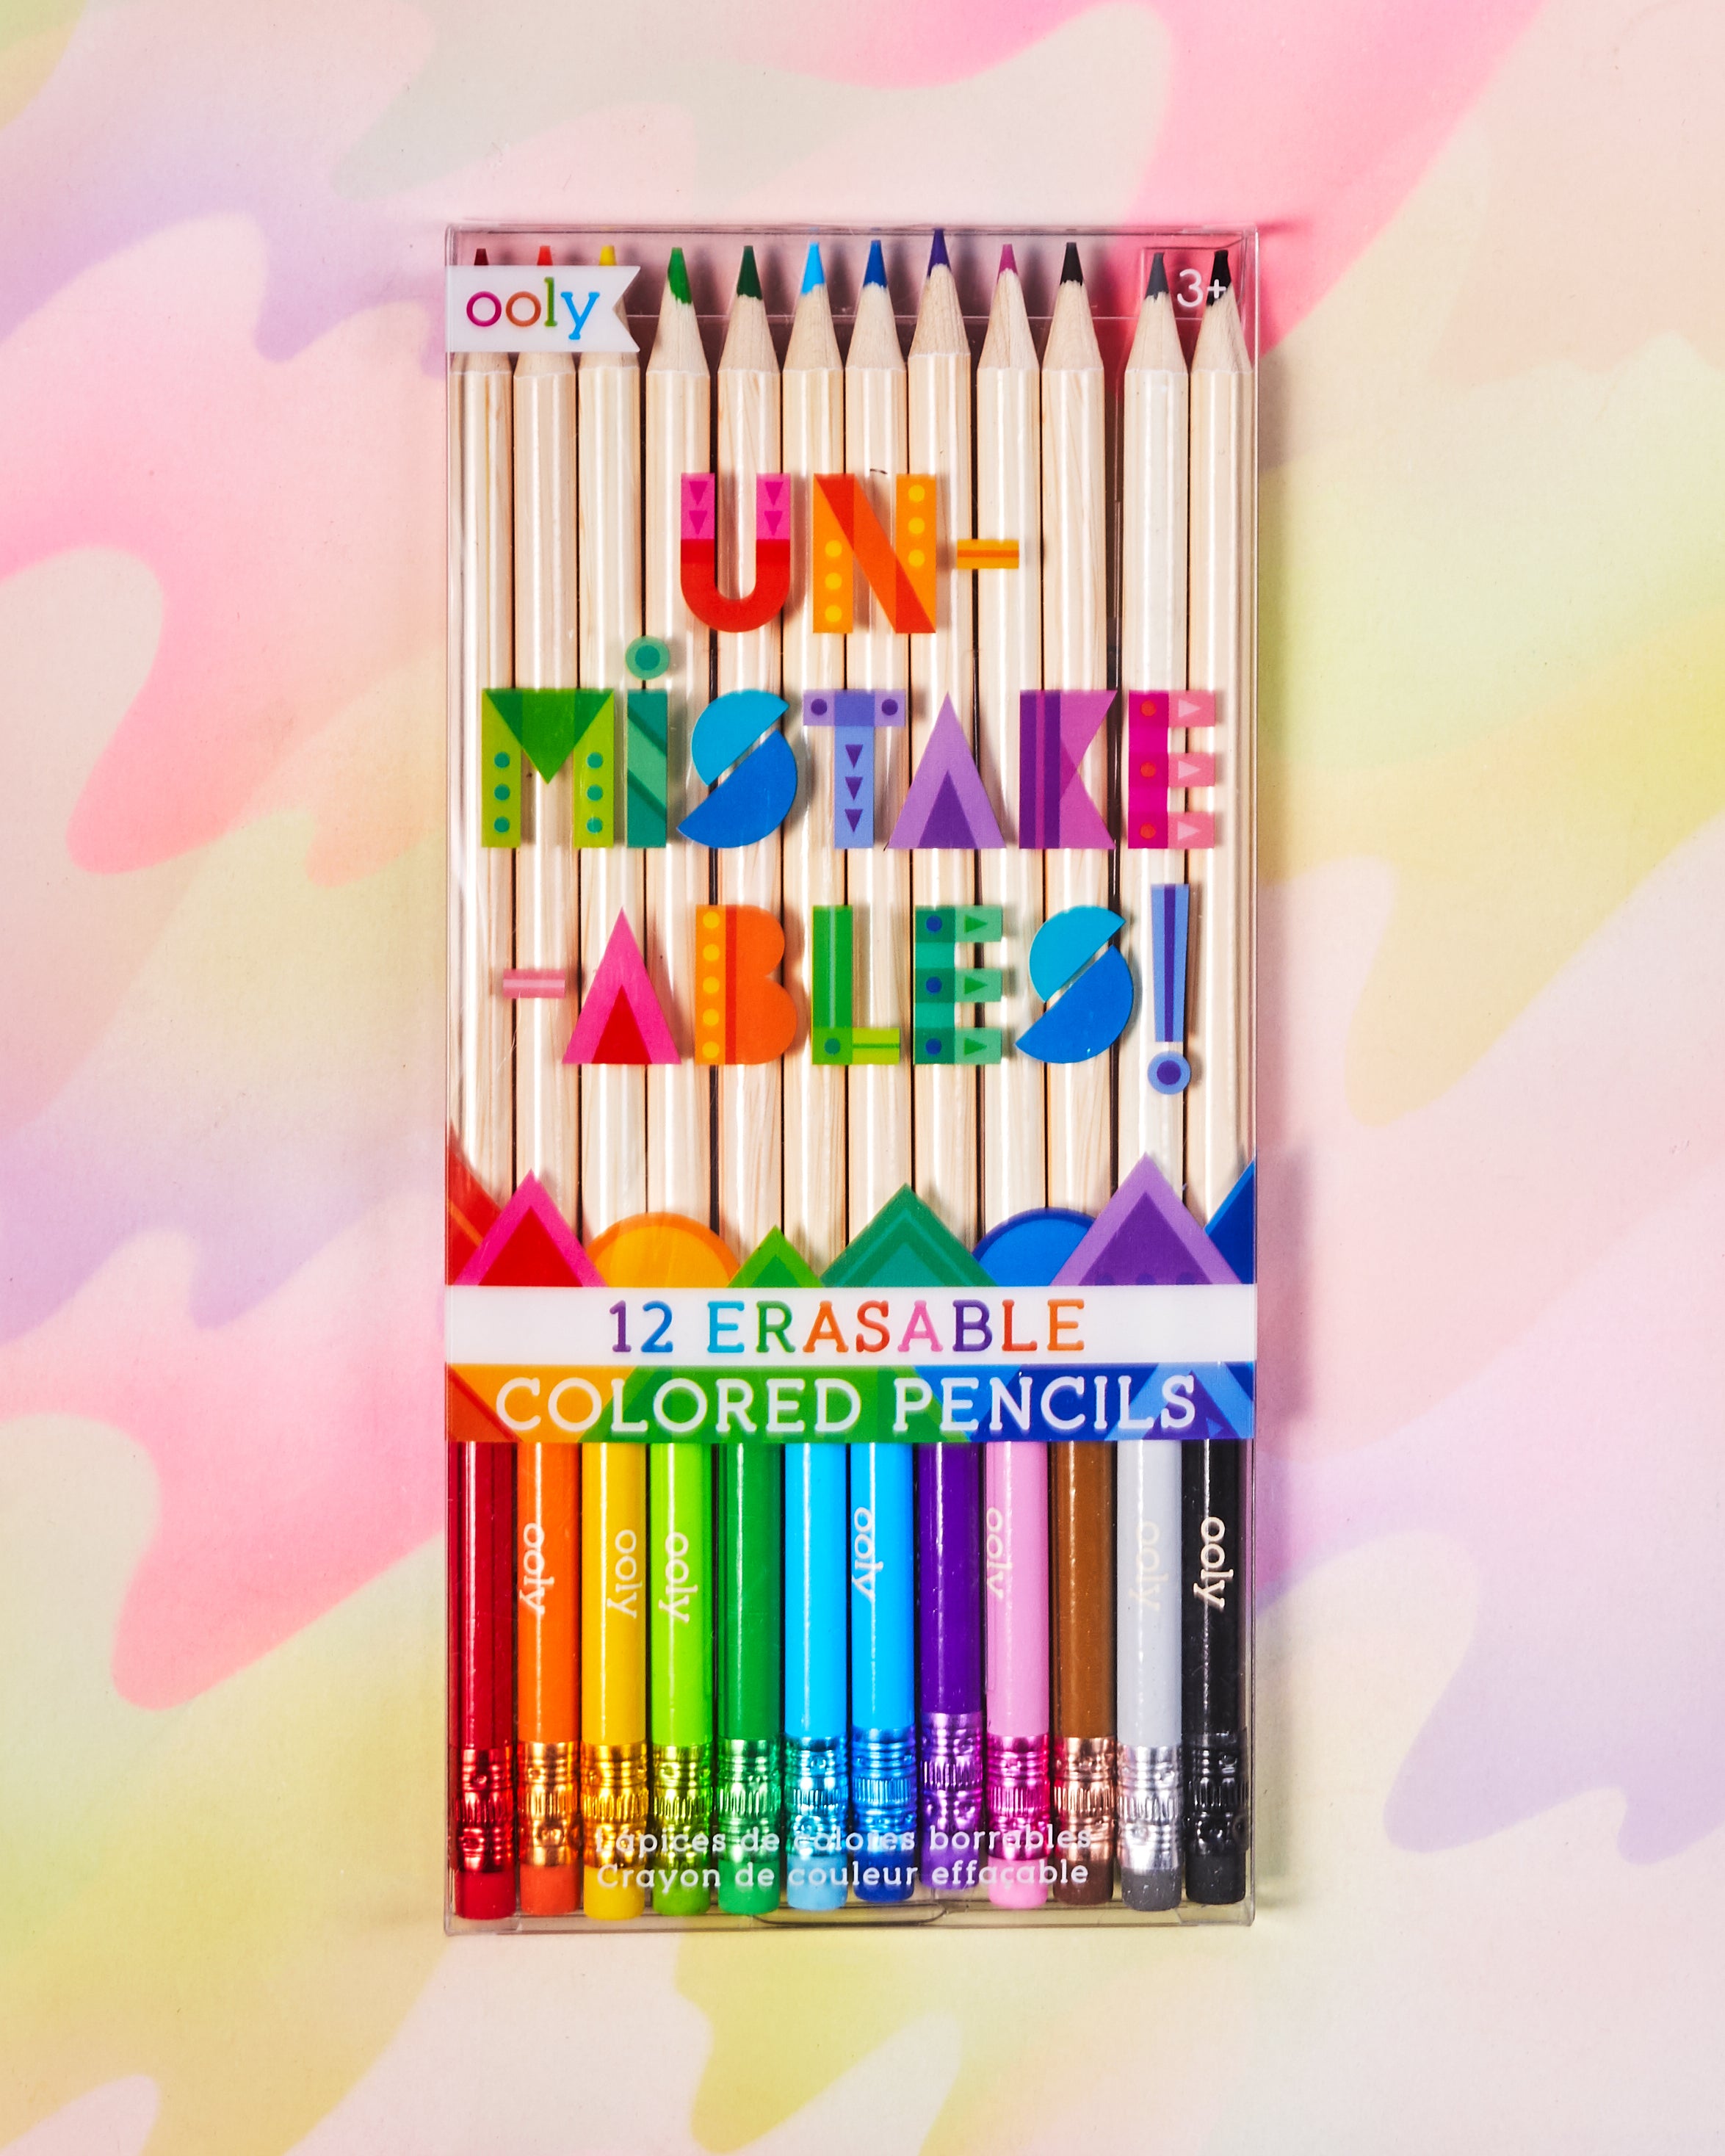 Ooly Unmistakeables Colored Pencil Set of 12 – Crush